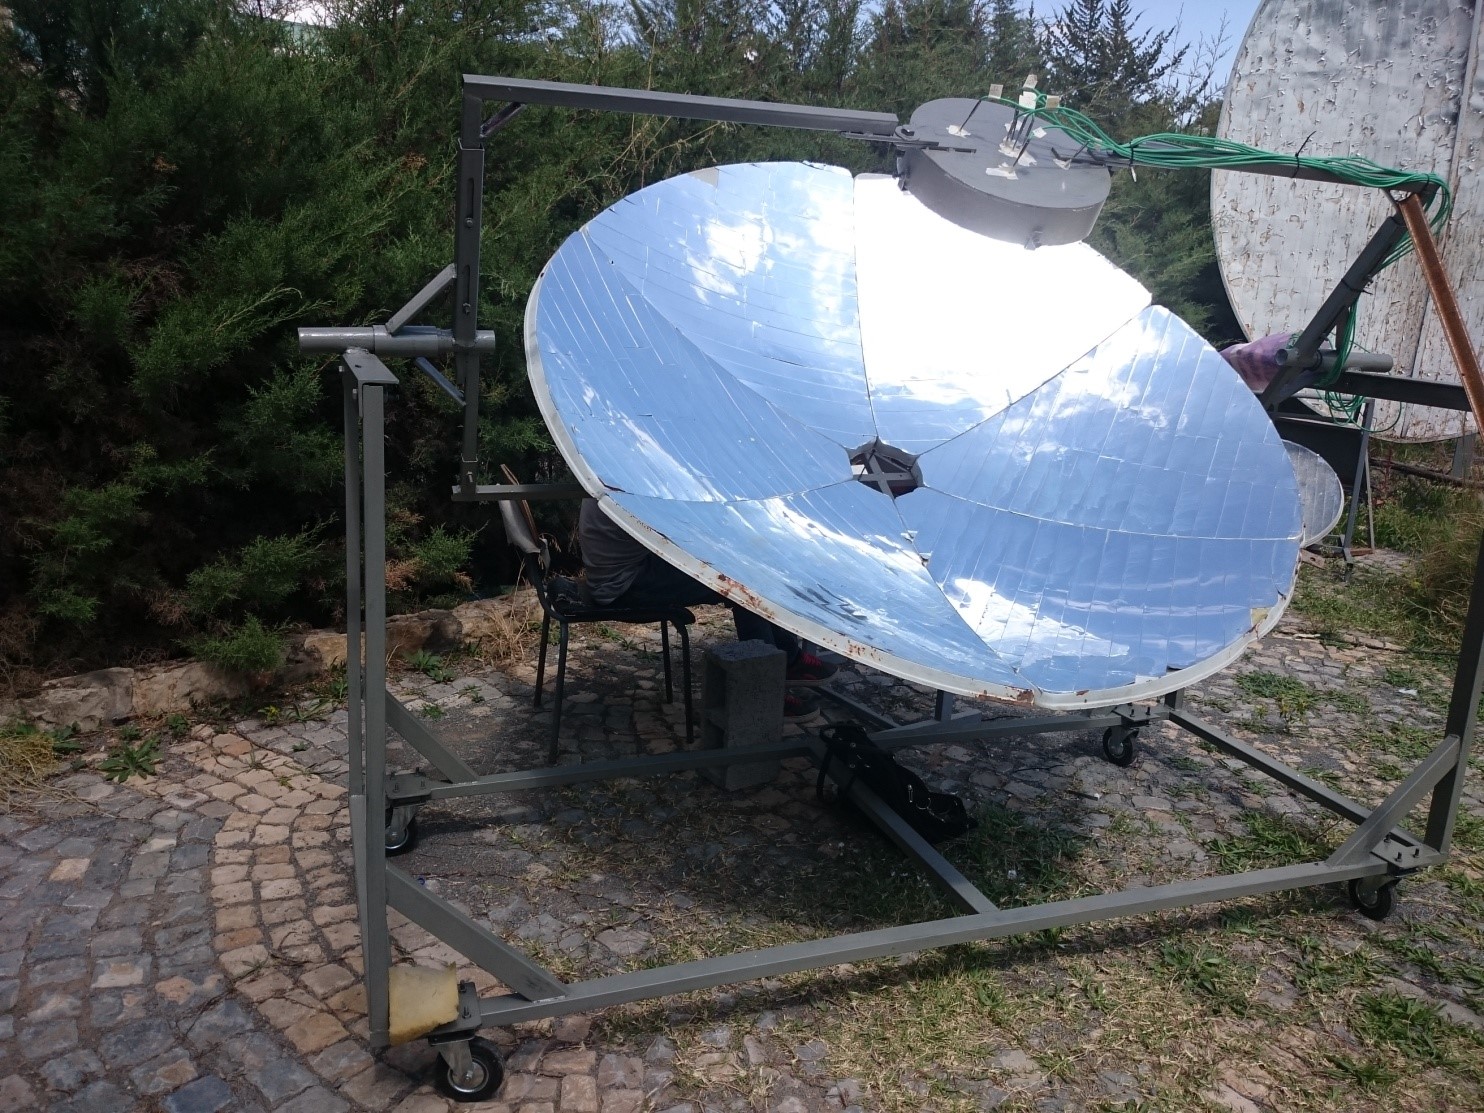 A ray tracer model for analysis of solar concentrating systems